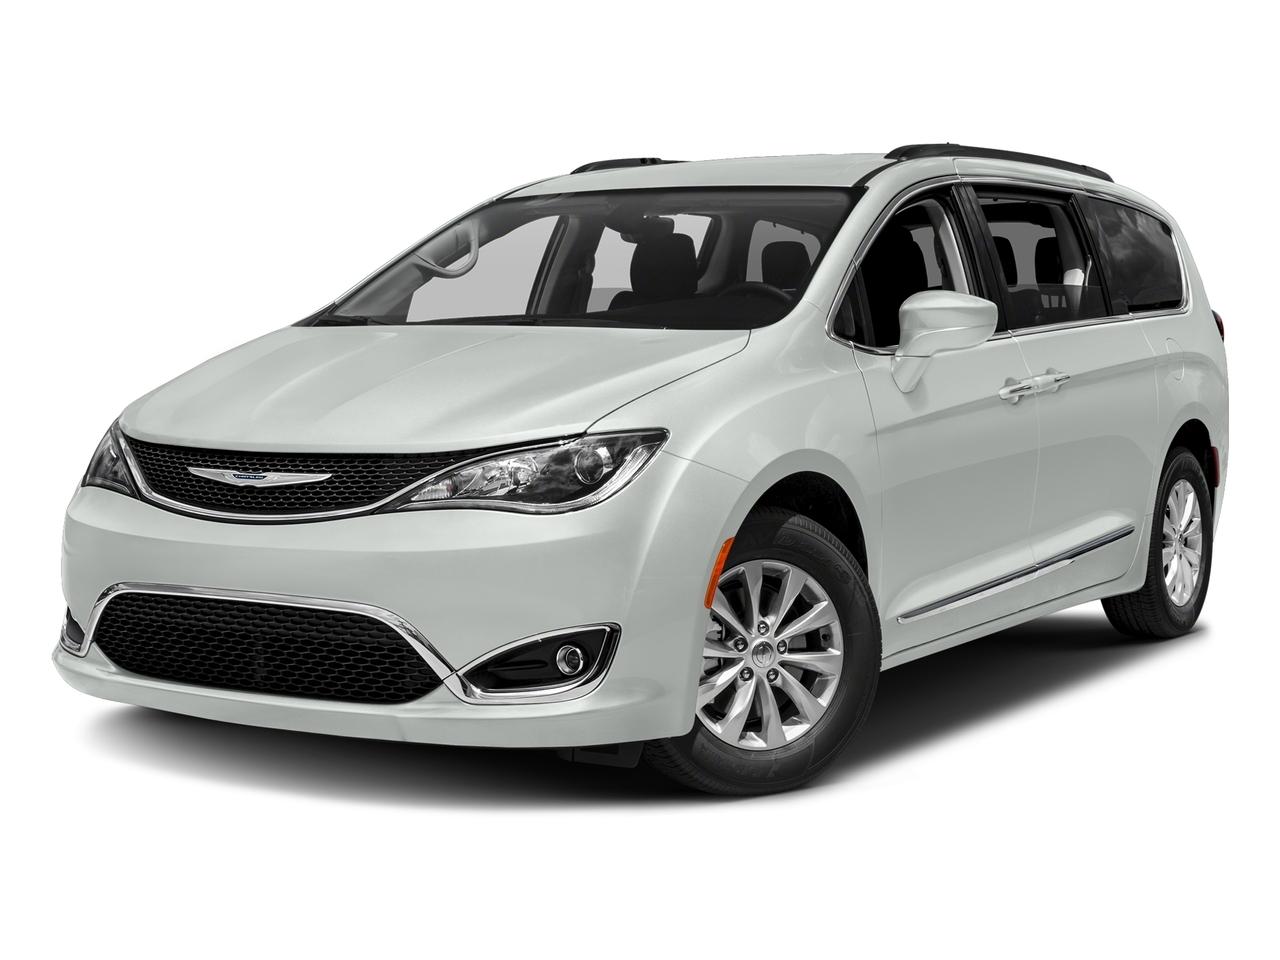 2017 Chrysler Pacifica Vehicle Photo in COLUMBIA, MO 65203-3903